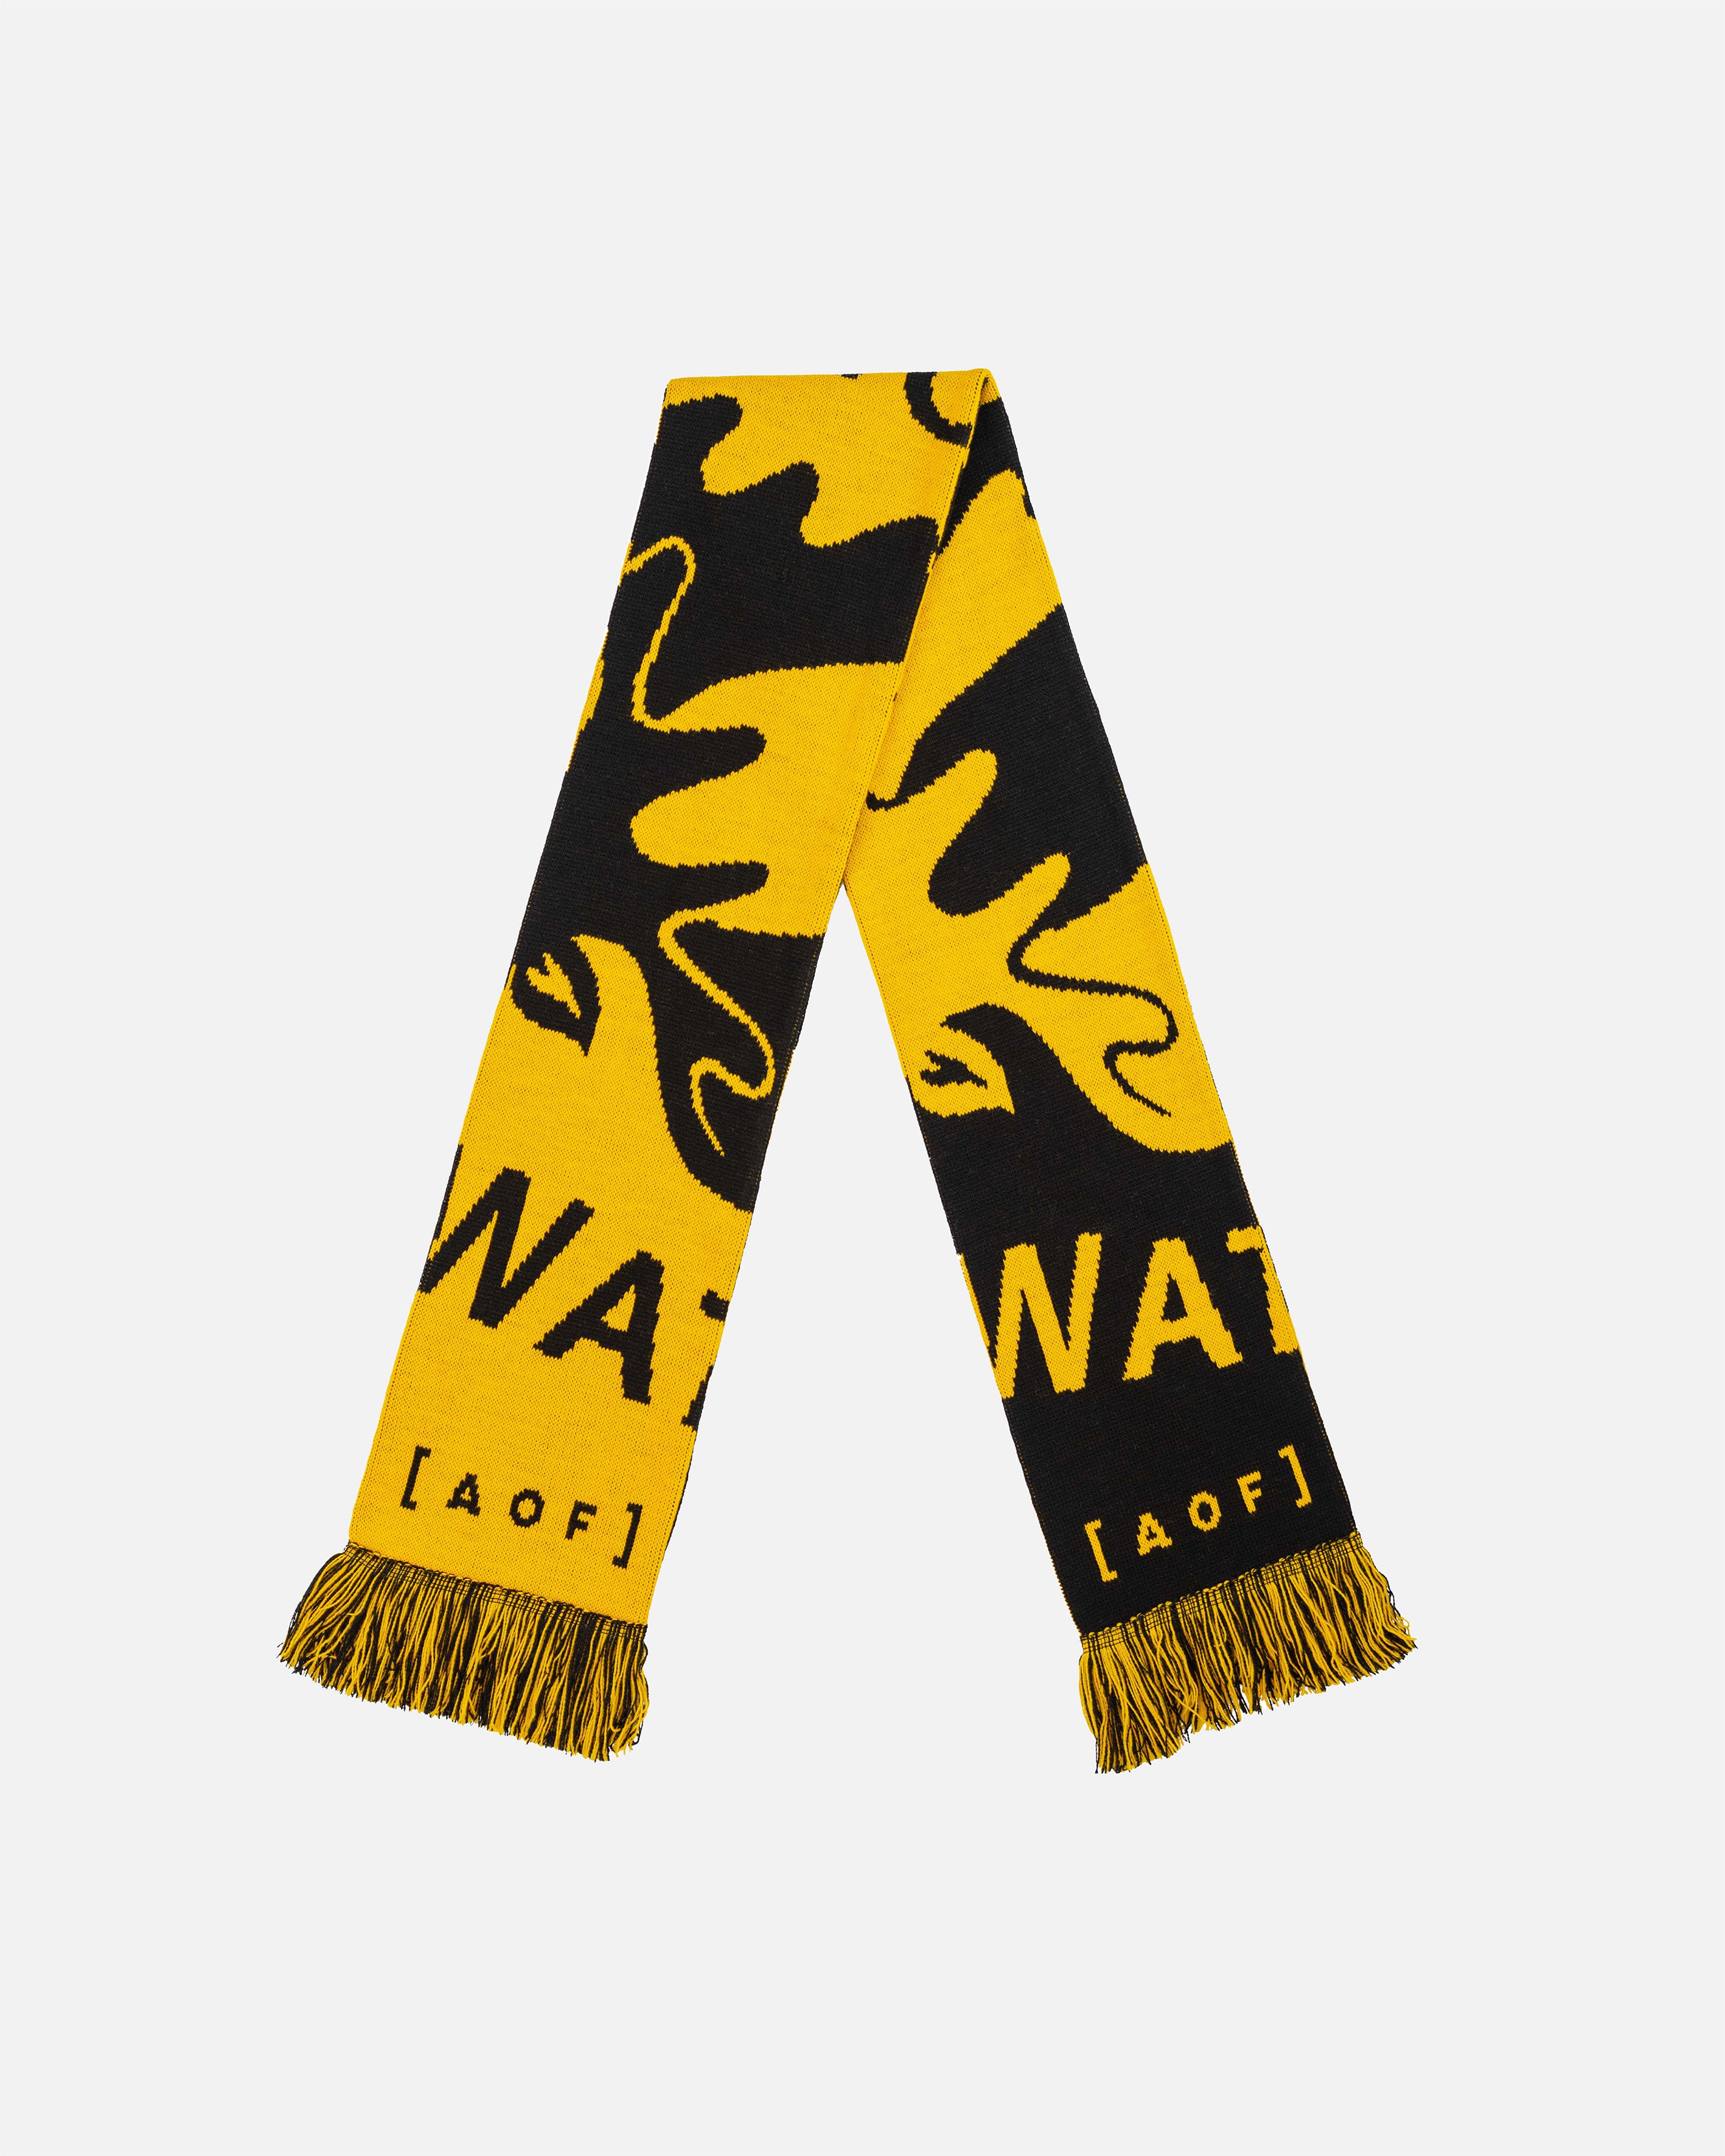 AOF x Watford Abstract Crest - Scarf